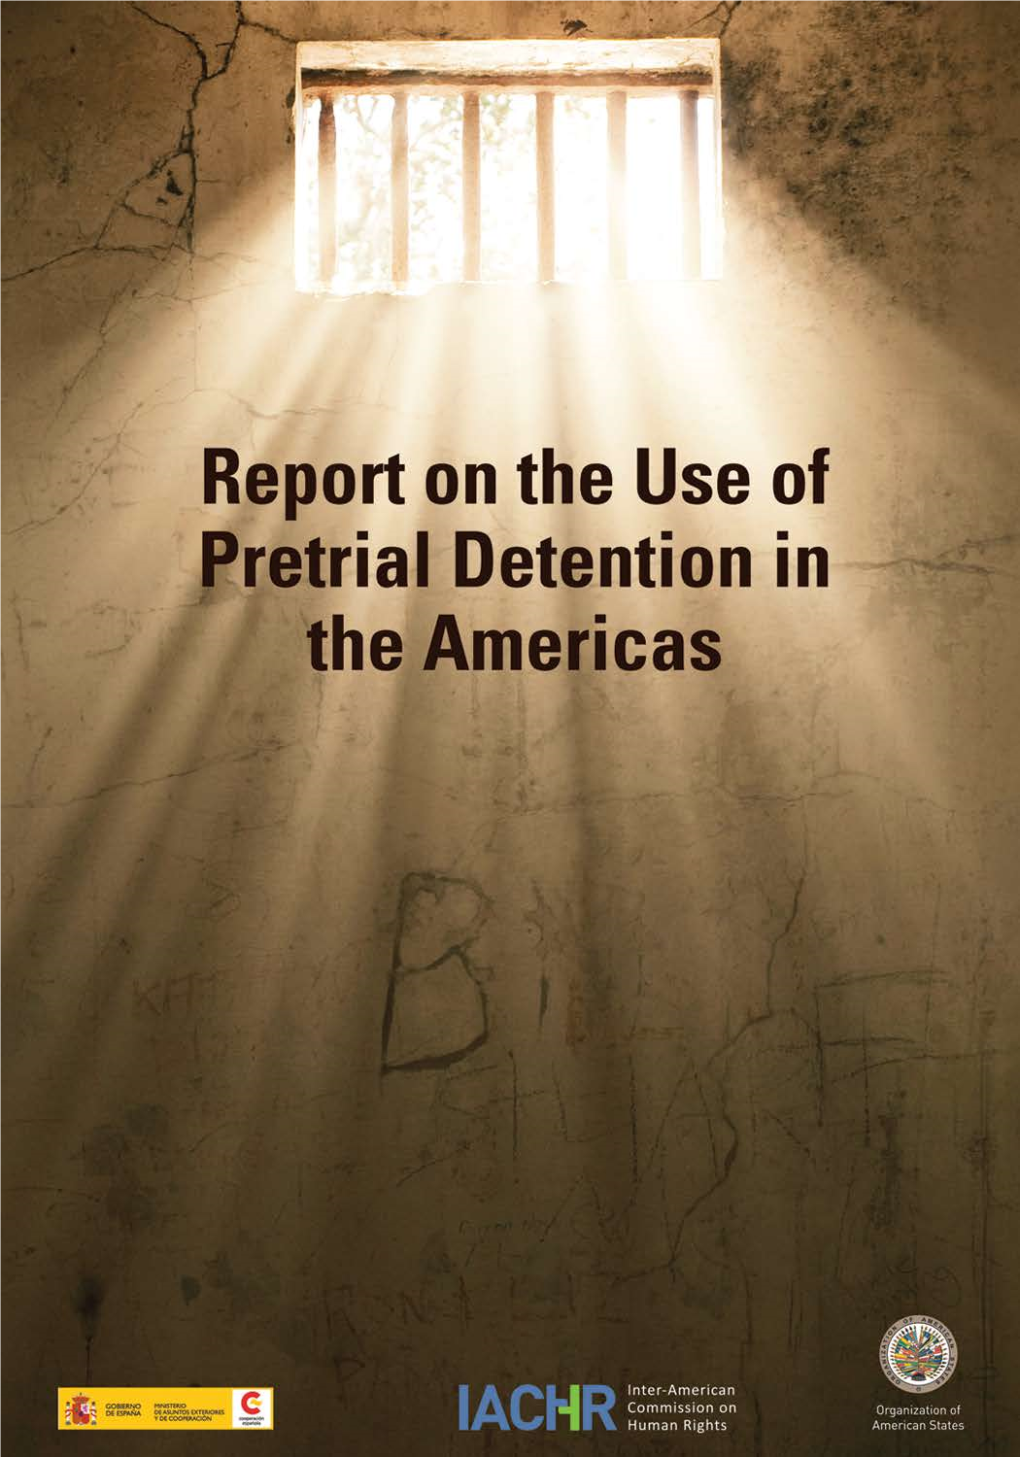 Report on the Use of Pretrial Detention in the Americas